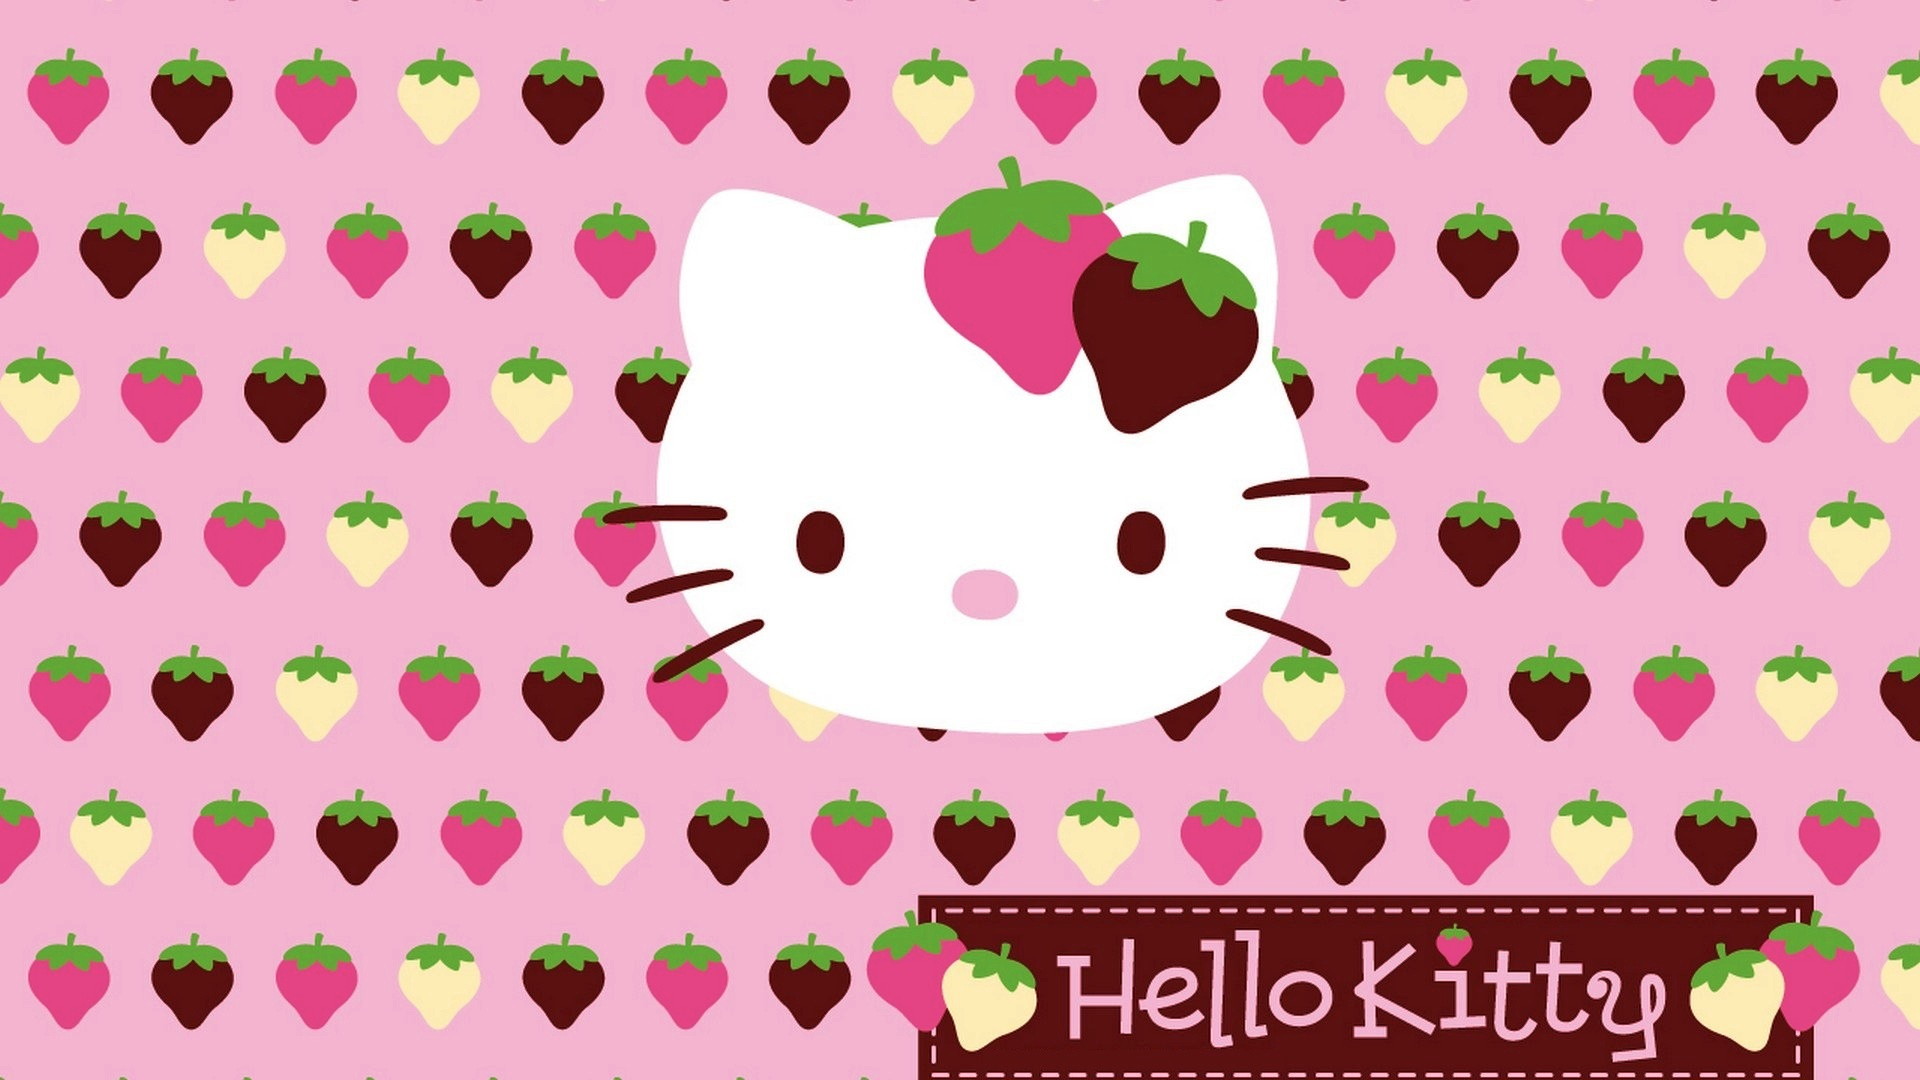 Hello Kitty Wallpaper HD Laptop with high-resolution 1920x1080 pixel. You can use and set as wallpaper for Notebook Screensavers, Mac Wallpapers, Mobile Home Screen, iPhone or Android Phones Lock Screen